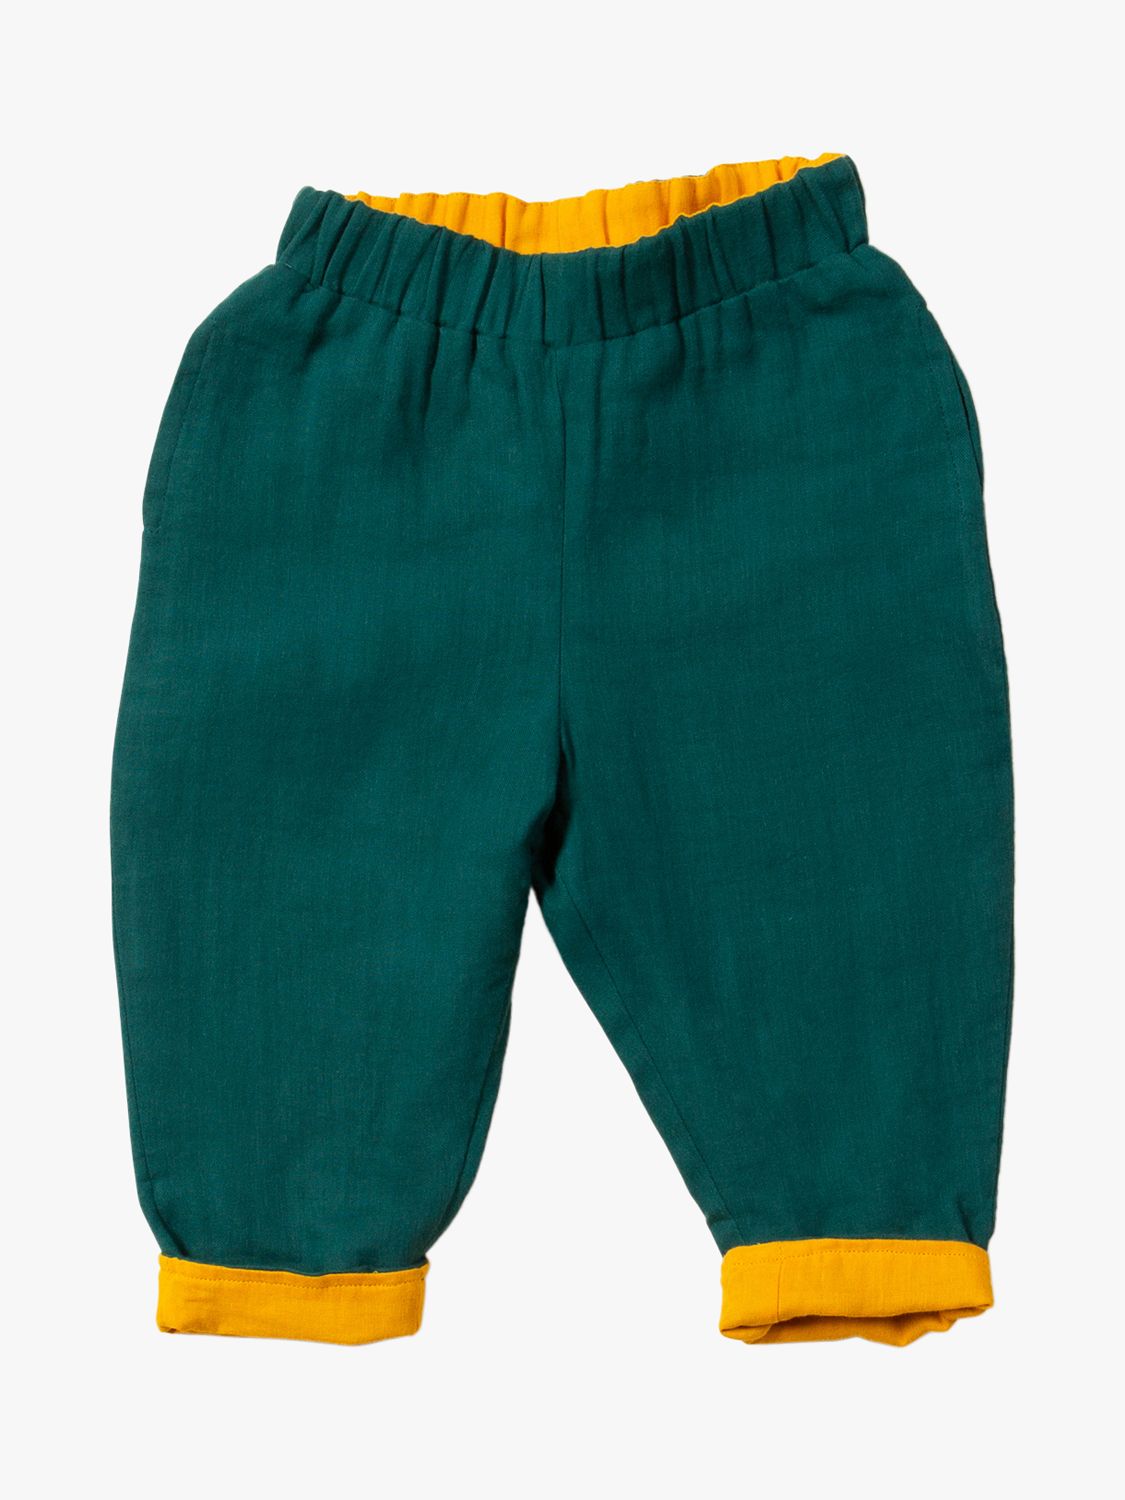 Little Green Radicals Baby Organic Cotton Reversible Pull On Trousers, Gold/Green, 6-9 months